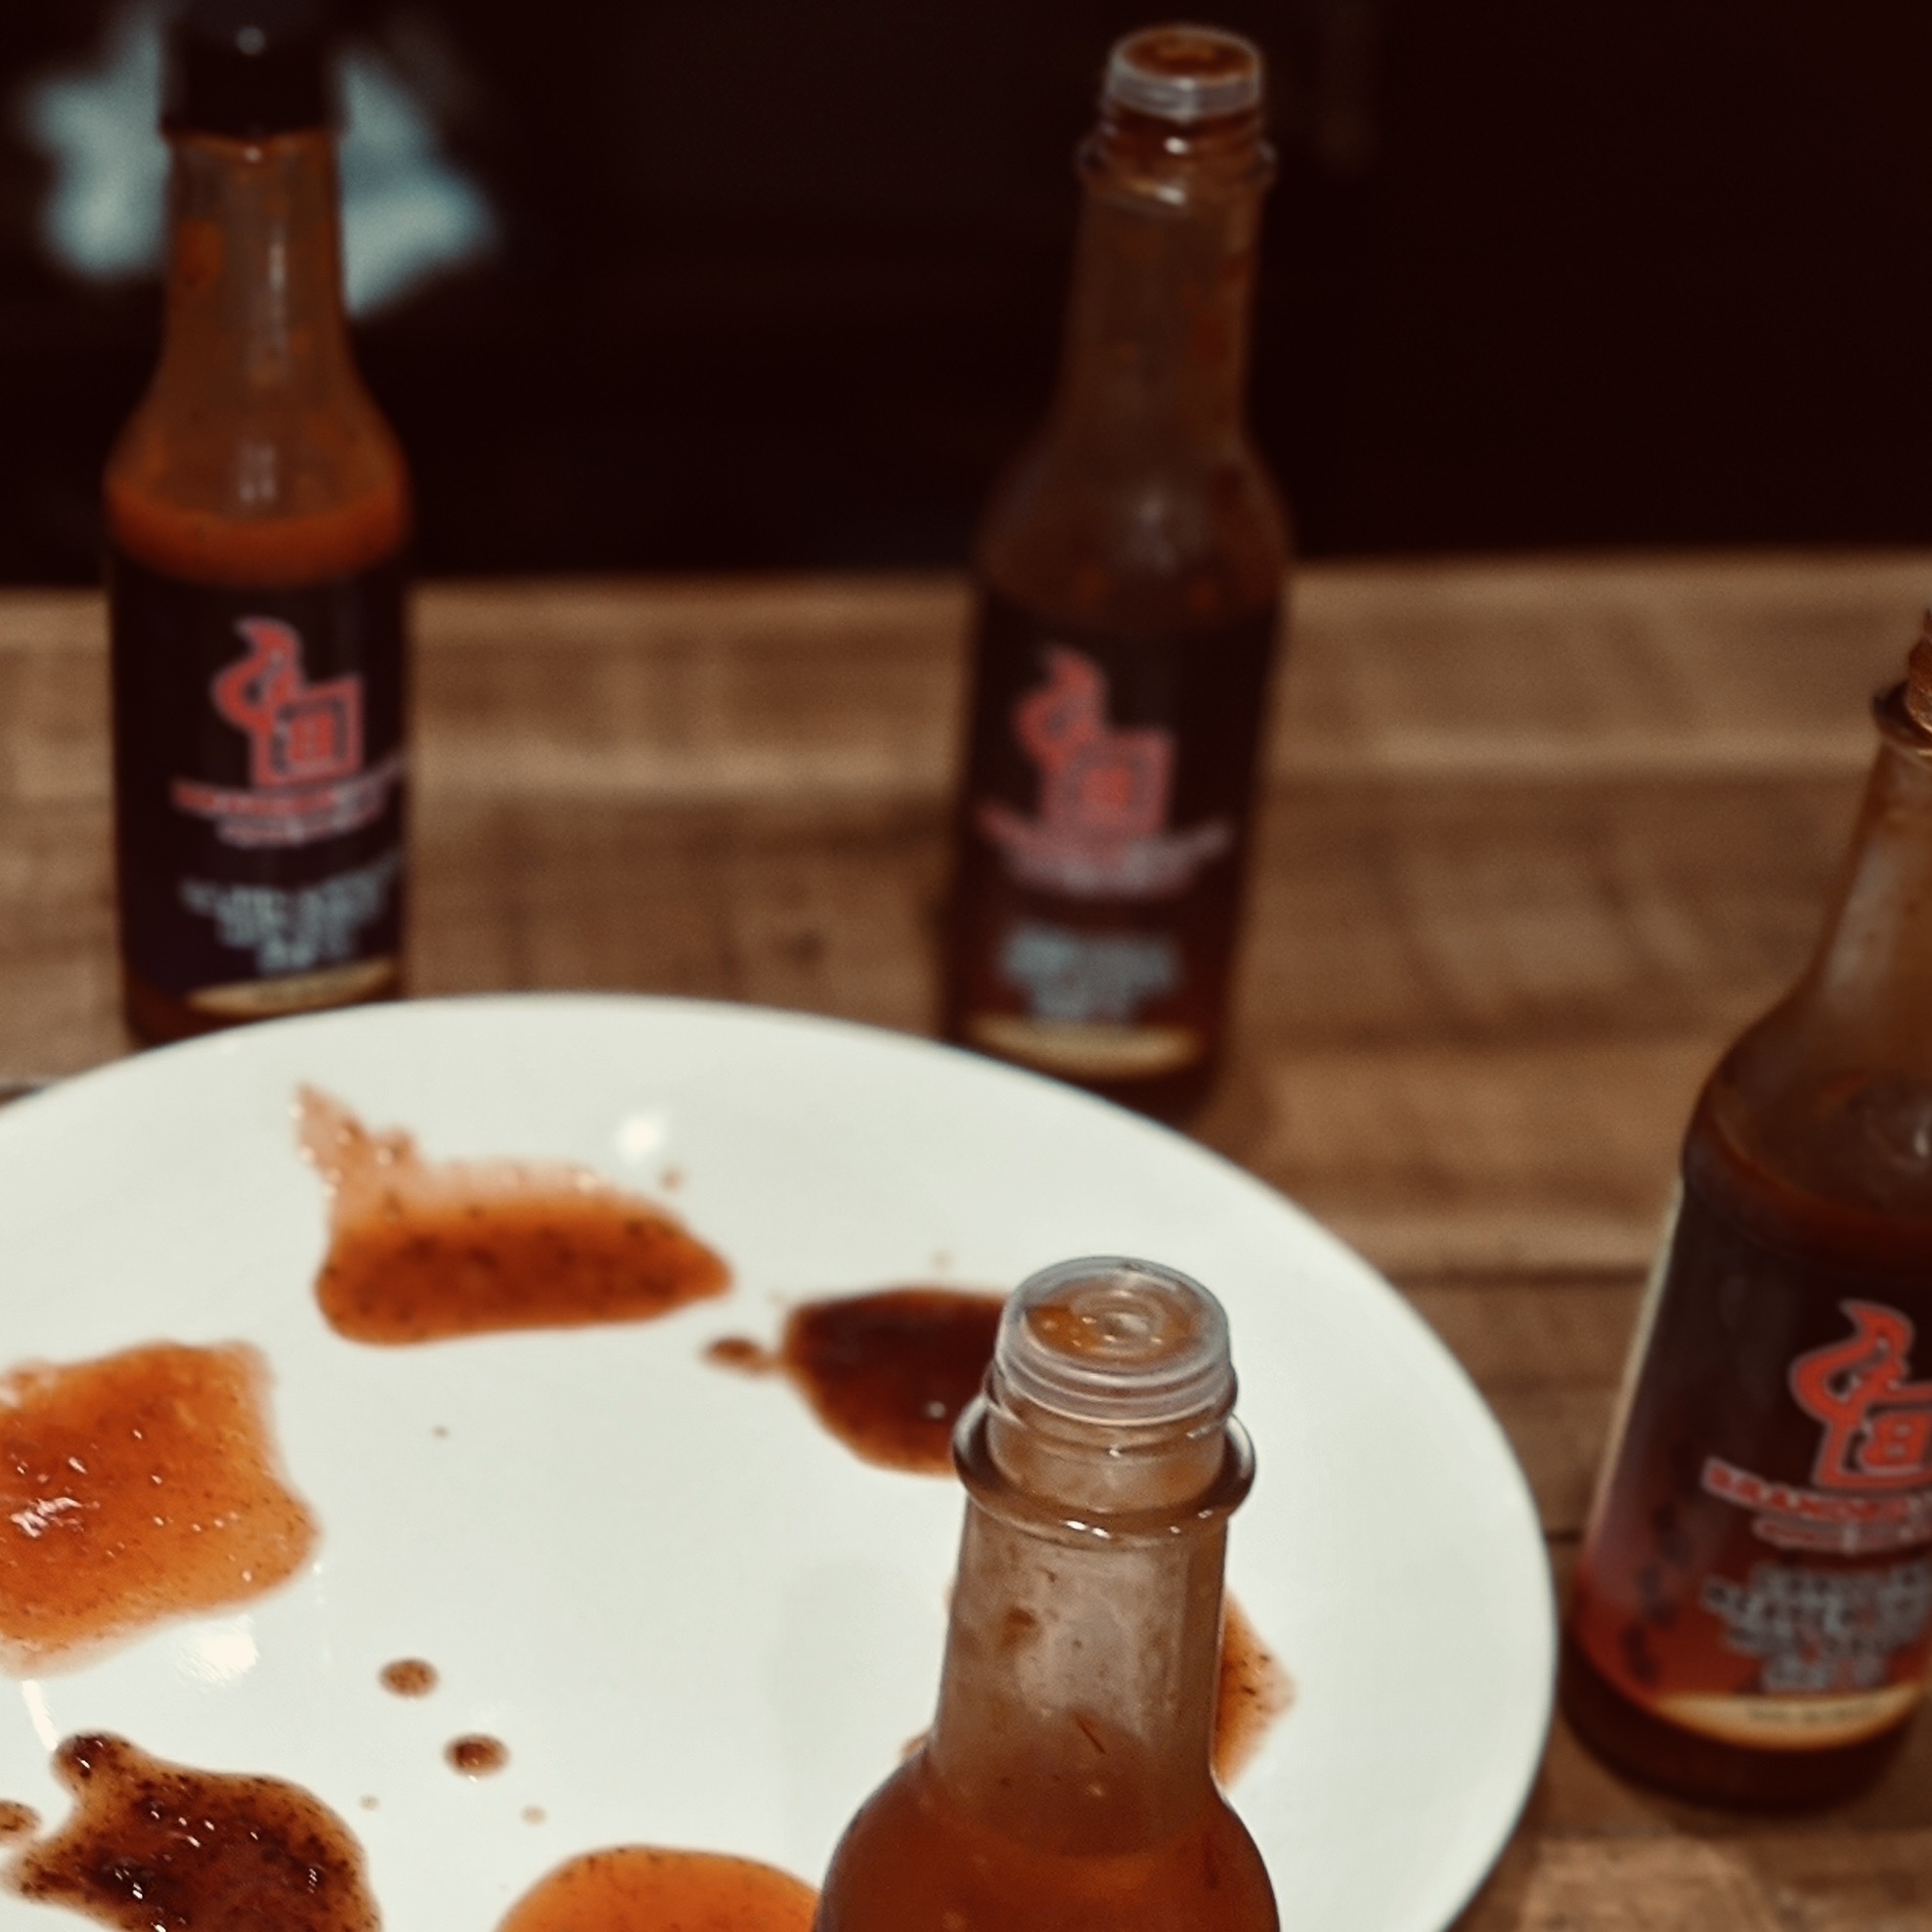 several hot sauce bottles around a plate, with part of each bottle poured into a spot on the plate that allows for dipping